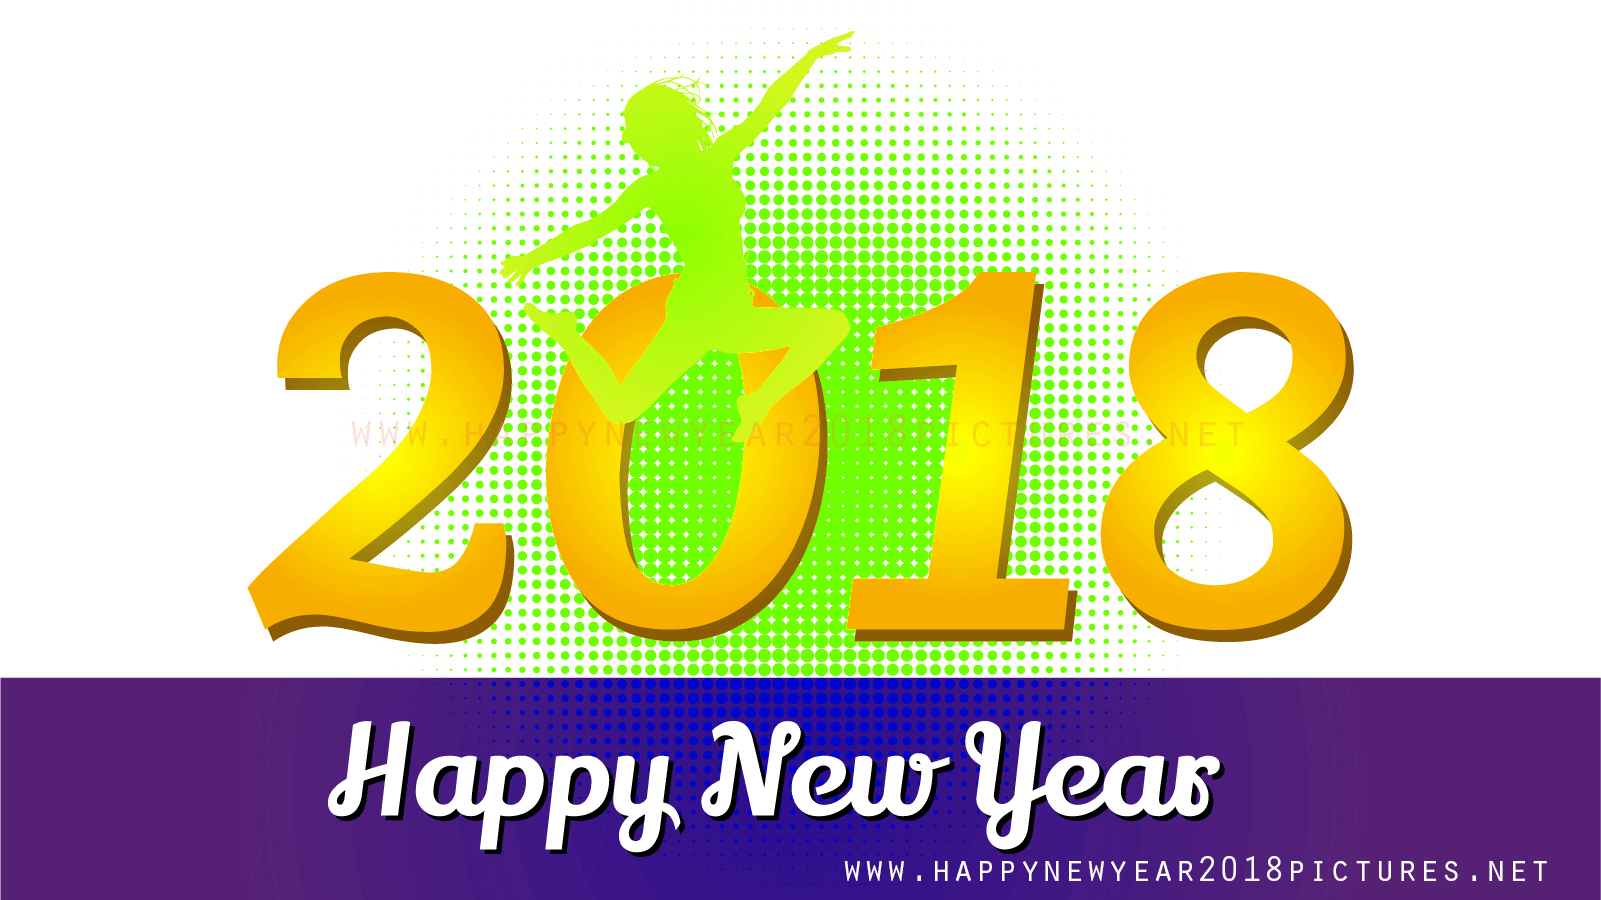 Happy New Year 2017 Animated GIF Image Archives New Year